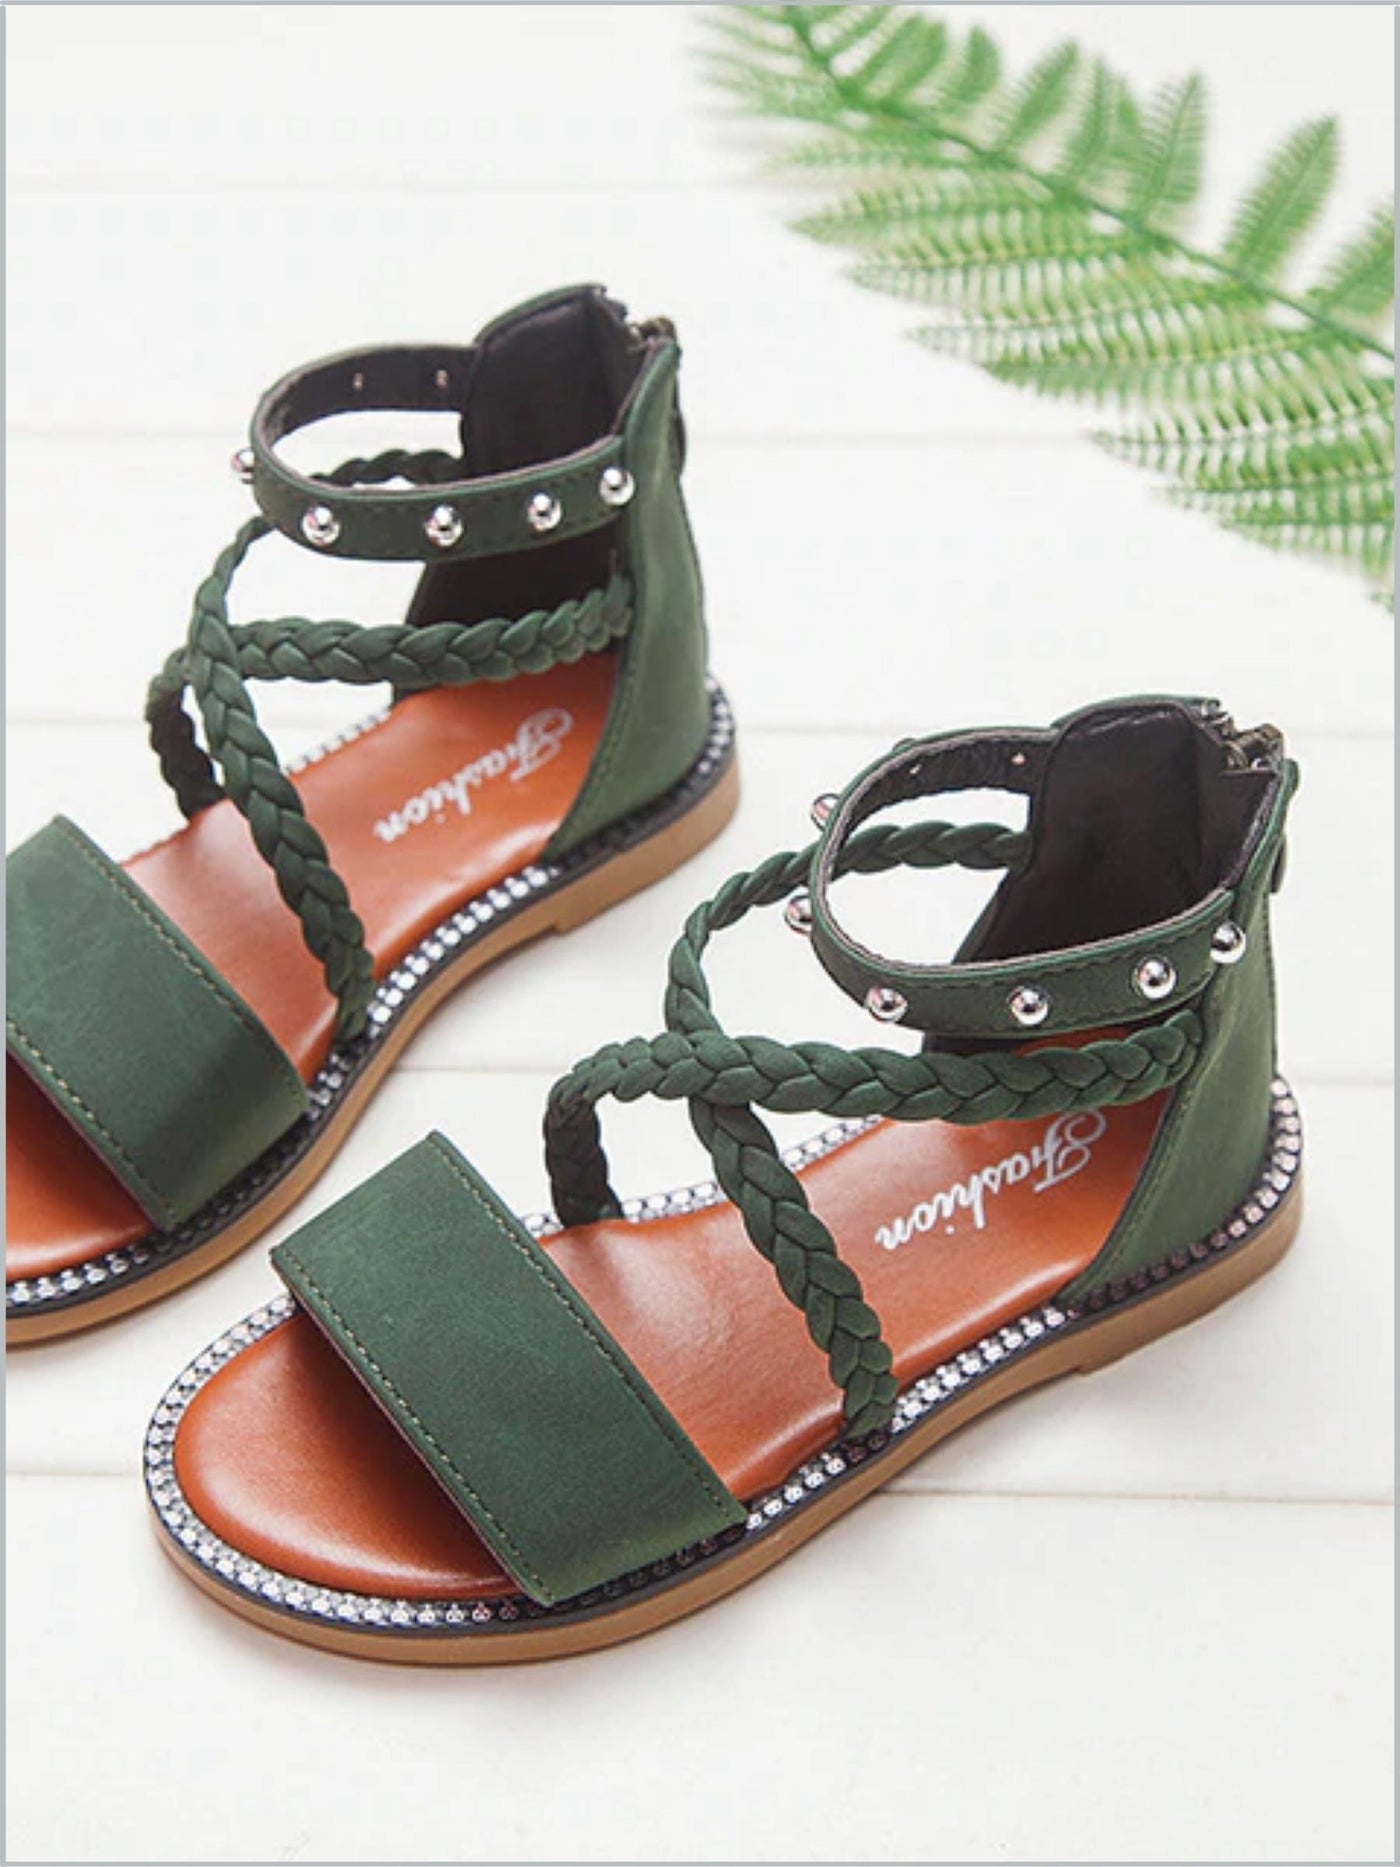 Mia Belle Girls Gladiator Sandals | Shoes by Liv and Mia